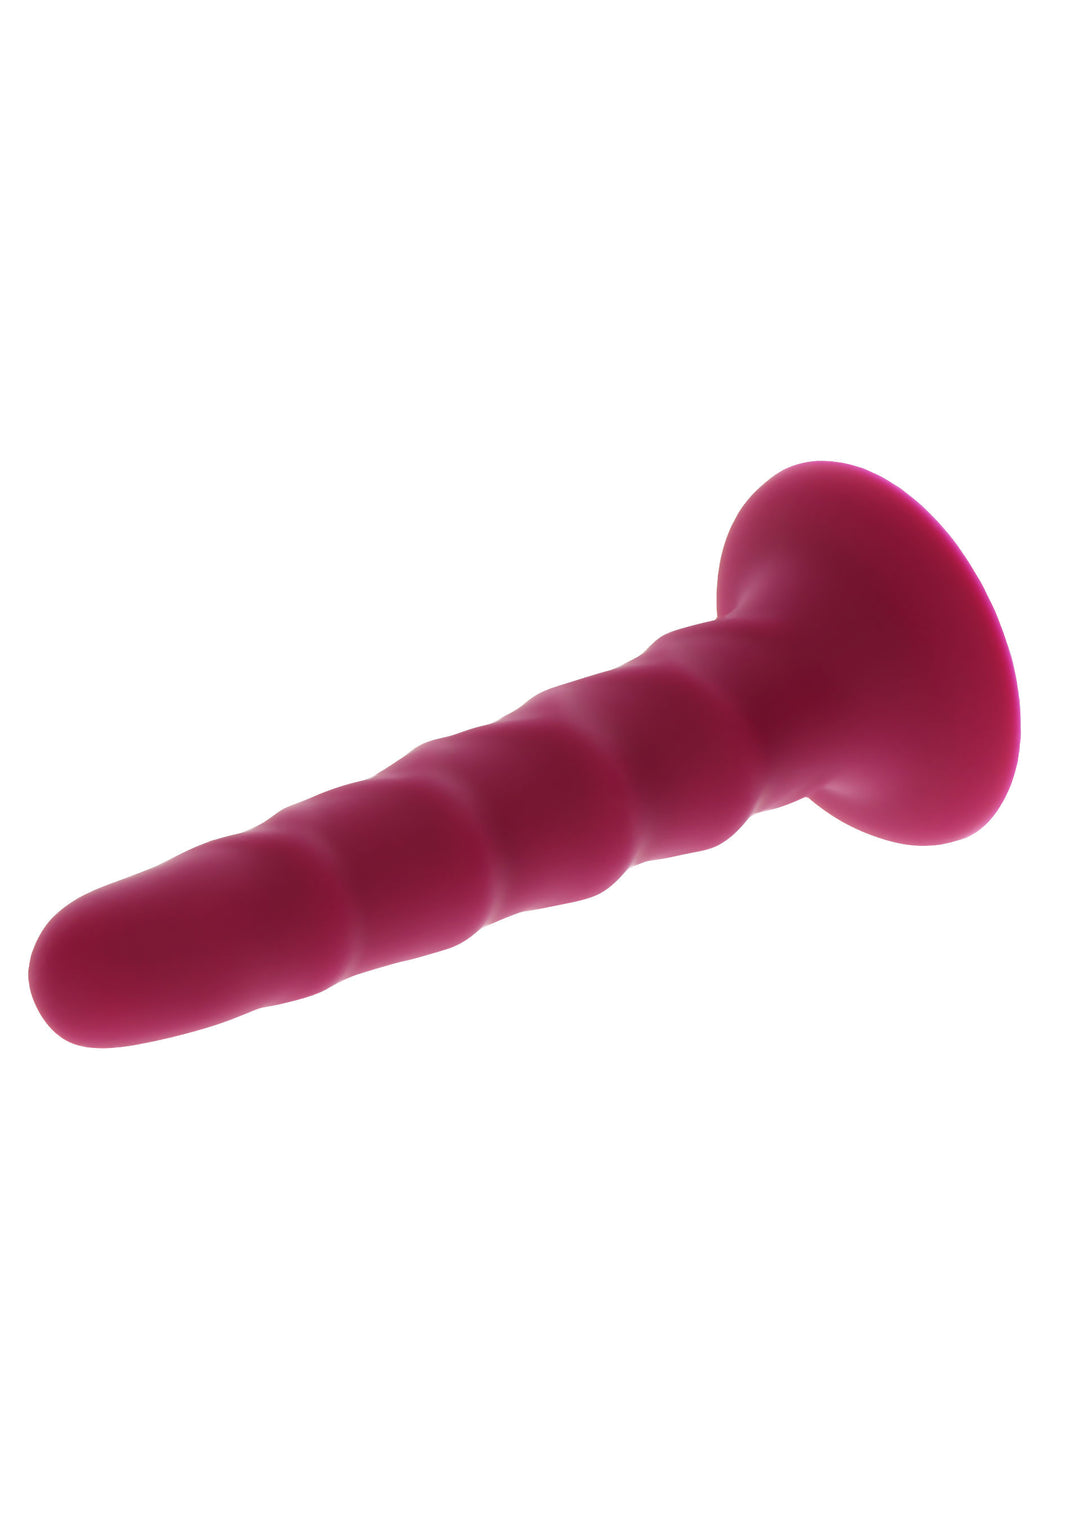 Dildo Ribbed Get Real Red - 16cm